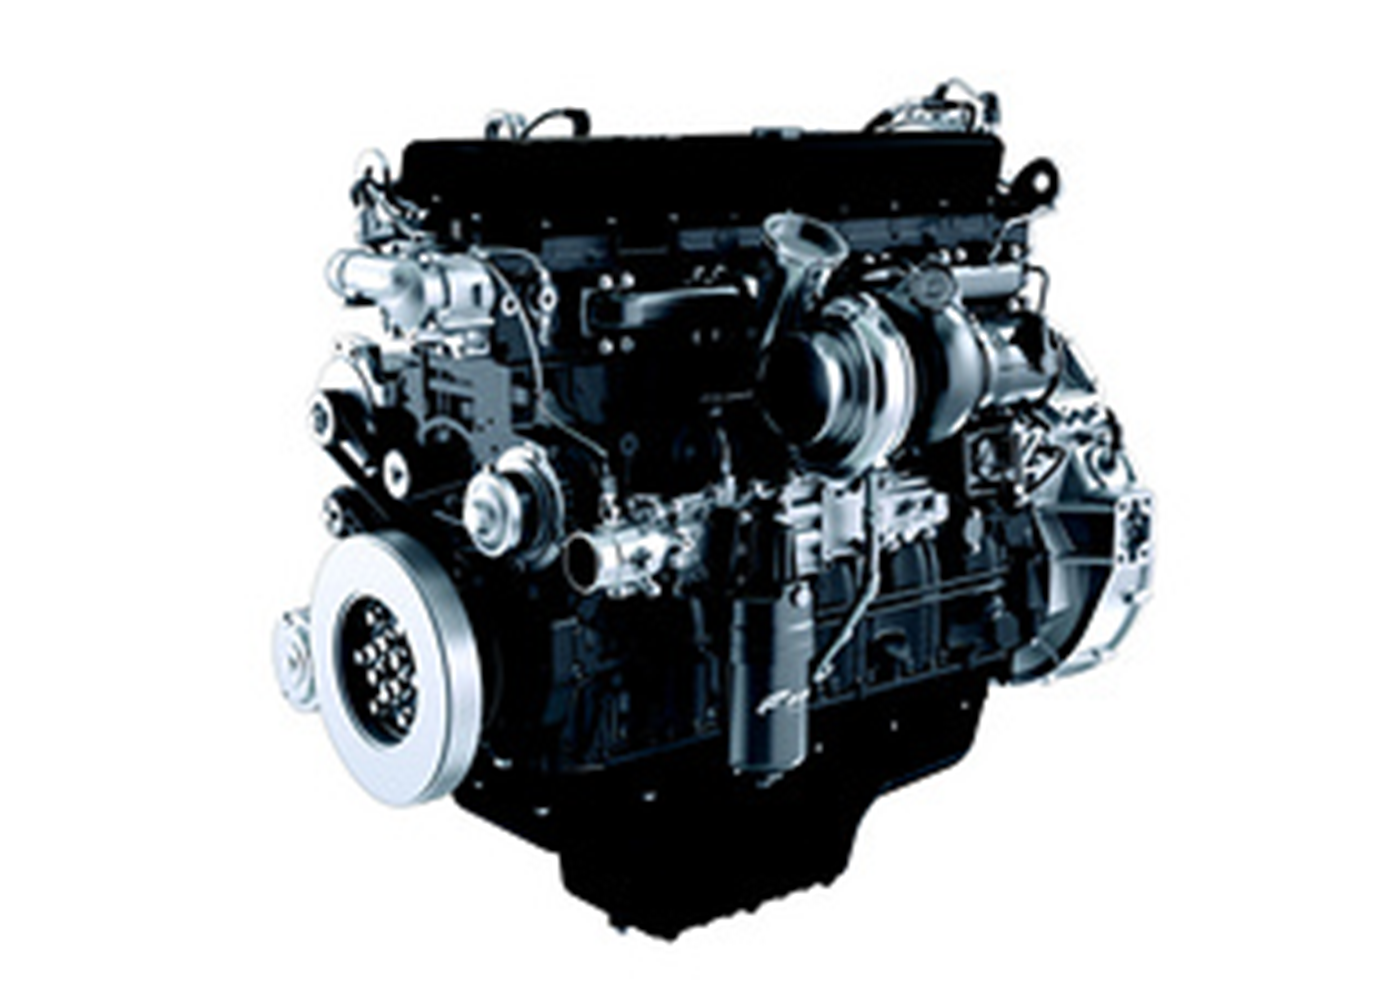 New Holland Agriculture Benefits from FPT Industrial Engine Voted ‘Diesel of the Year® 2014’